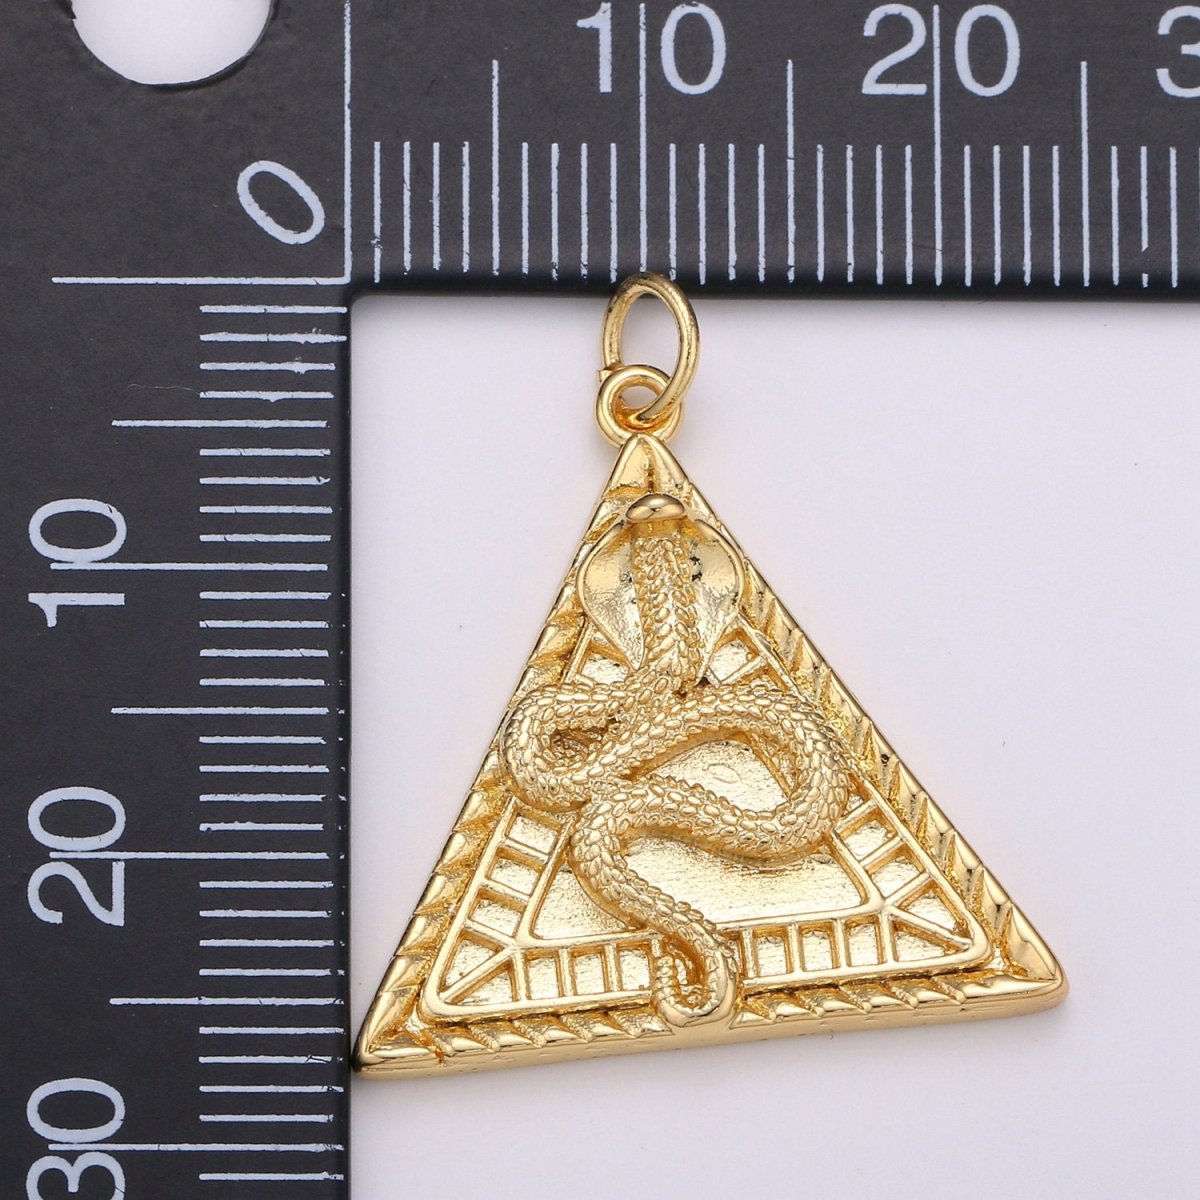 Dainty 14K Gold Filled Pyramid Charm, Snake pendant, Serpent Charm Egyptian Jewelry Supply D-319 - DLUXCA